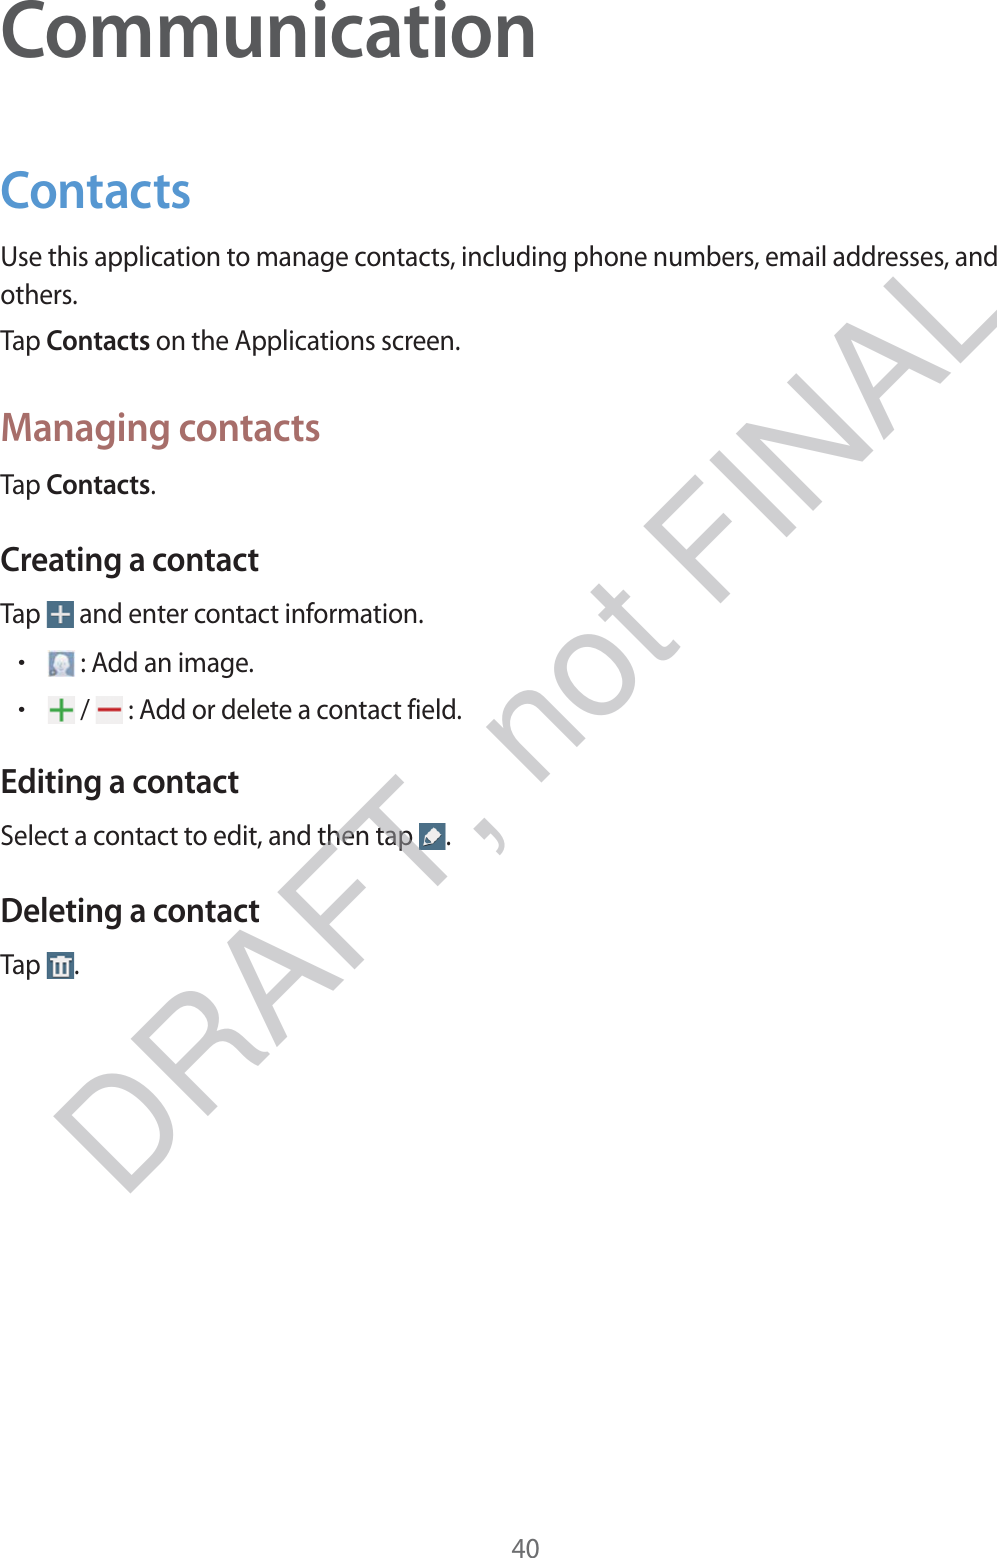 40CommunicationContactsUse this application to manage contacts, including phone numbers, email addresses, and others.Tap Contacts on the Applications screen.Managing contactsTap Contacts.Creating a contactTap   and enter contact information.r : Add an image.r /   : Add or delete a contact field.Editing a contactSelect a contact to edit, and then tap  .Deleting a contactTap  .DRAFT, not FINAL